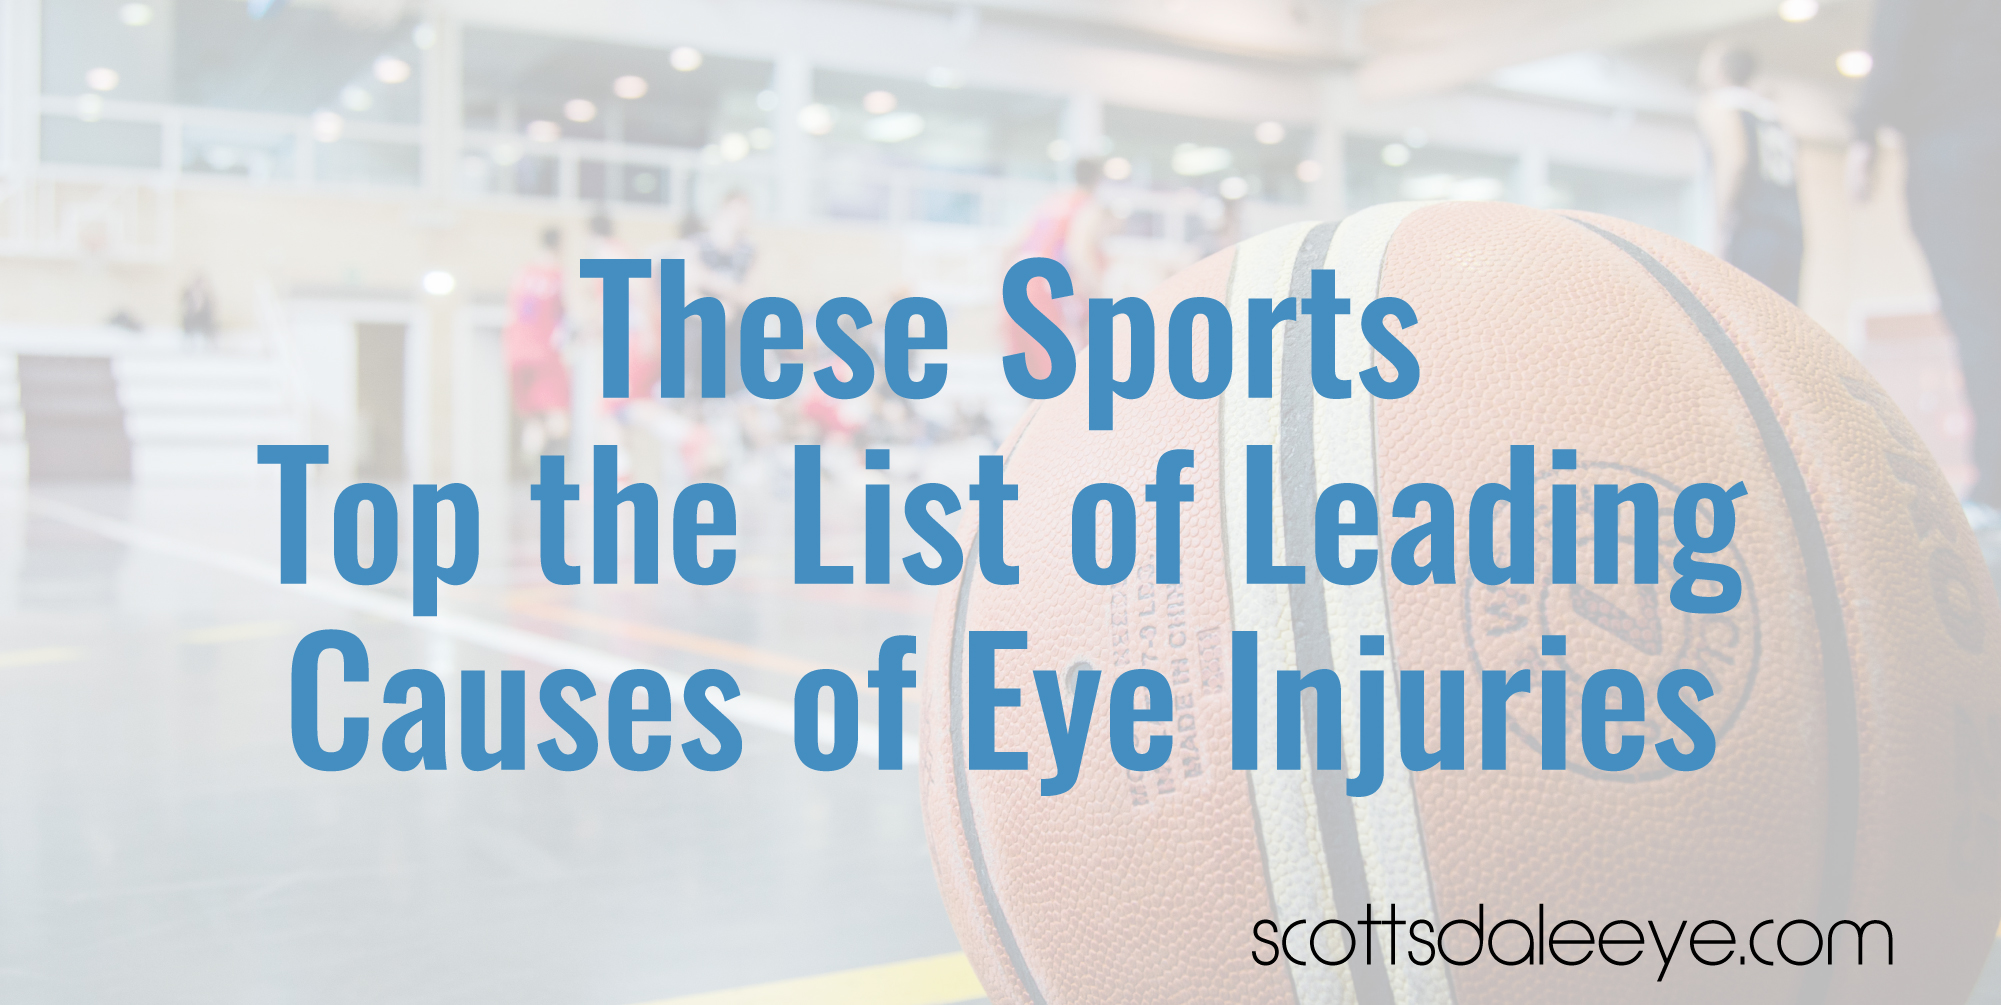 Eye Injuries, These Sports Top the List!